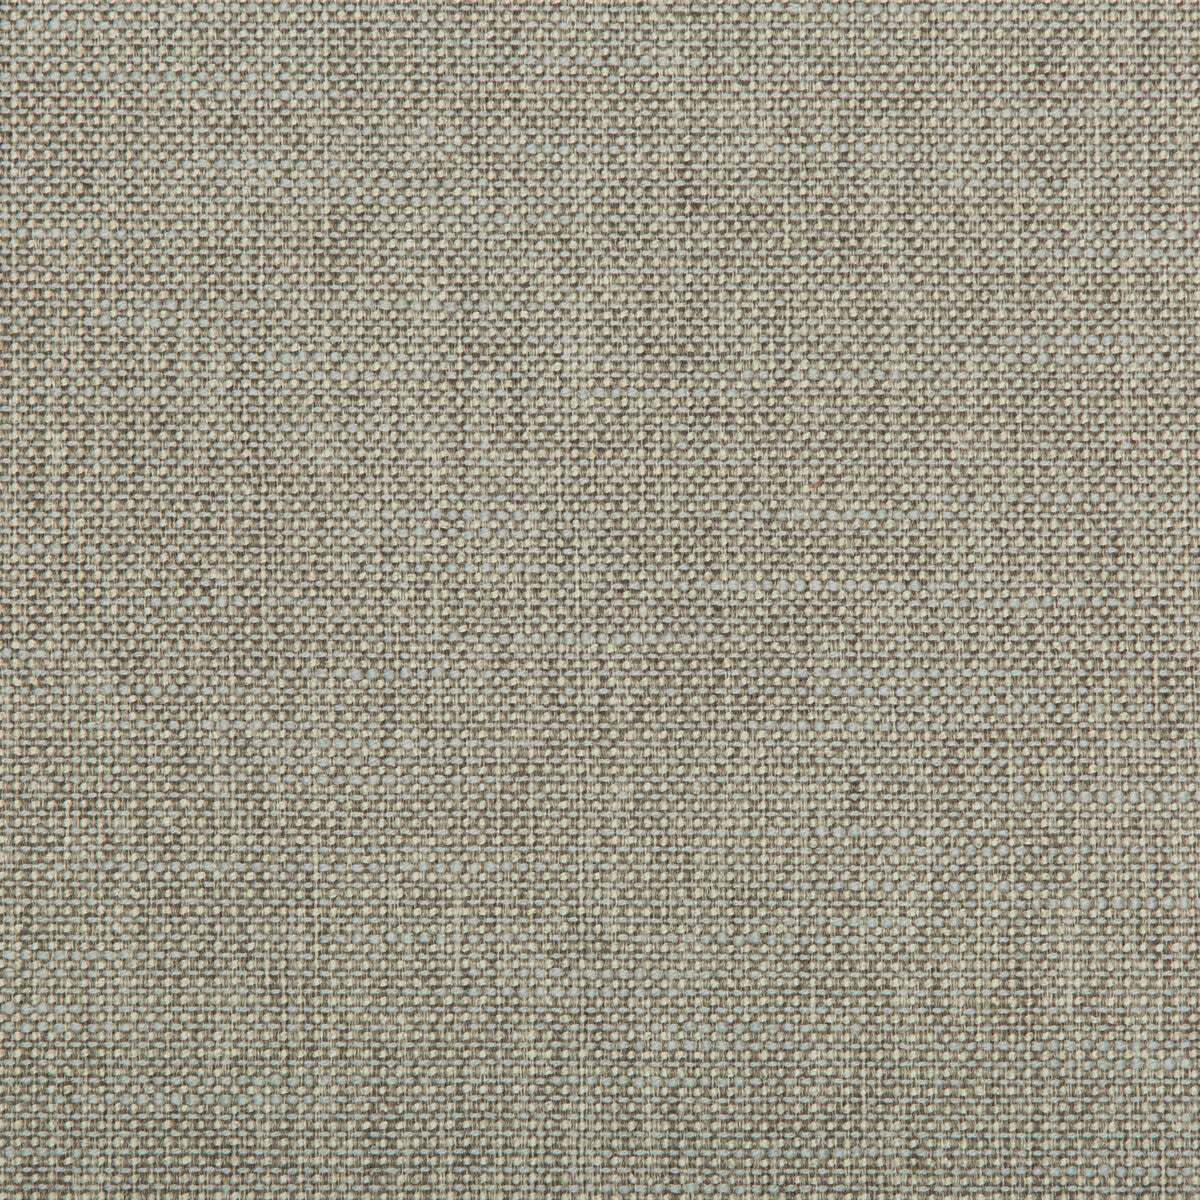 Heyward fabric in haze color - pattern 35746.1511.0 - by Kravet Contract in the Value Kravetarmor collection